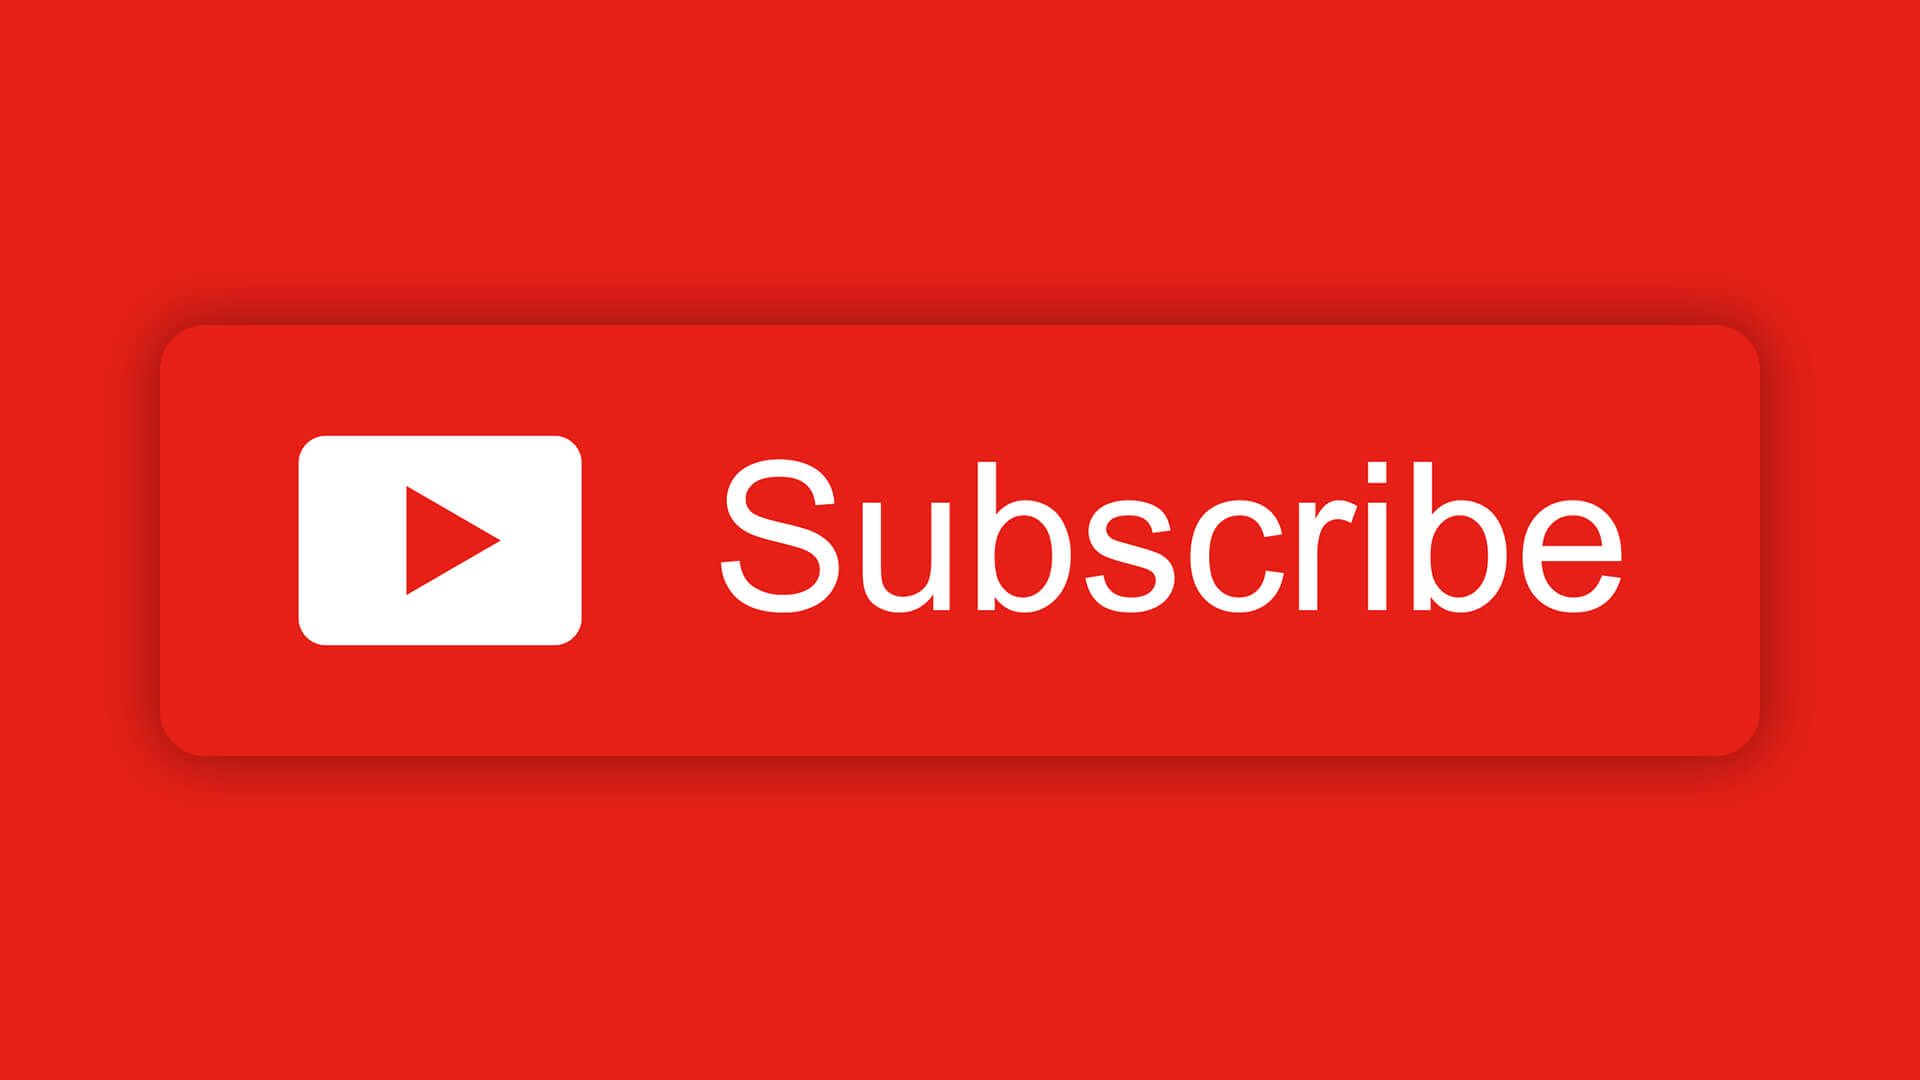 Add Subscribe to your account youtube